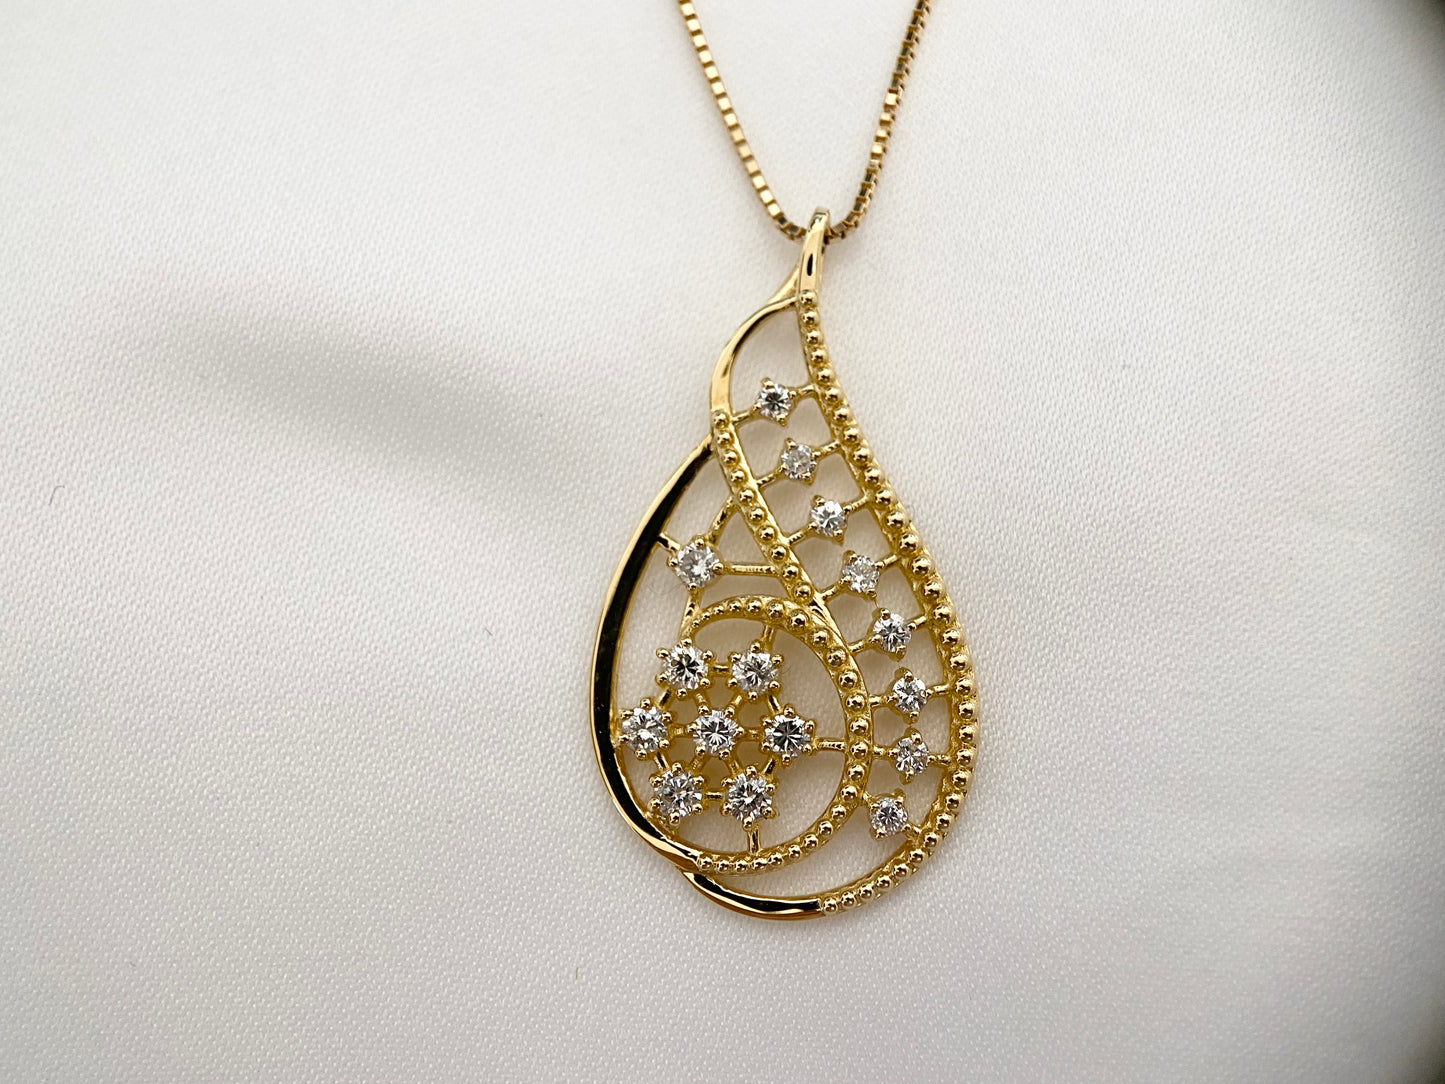 New] Luxurious diamond jewelry necklace conceived from penny farthings.